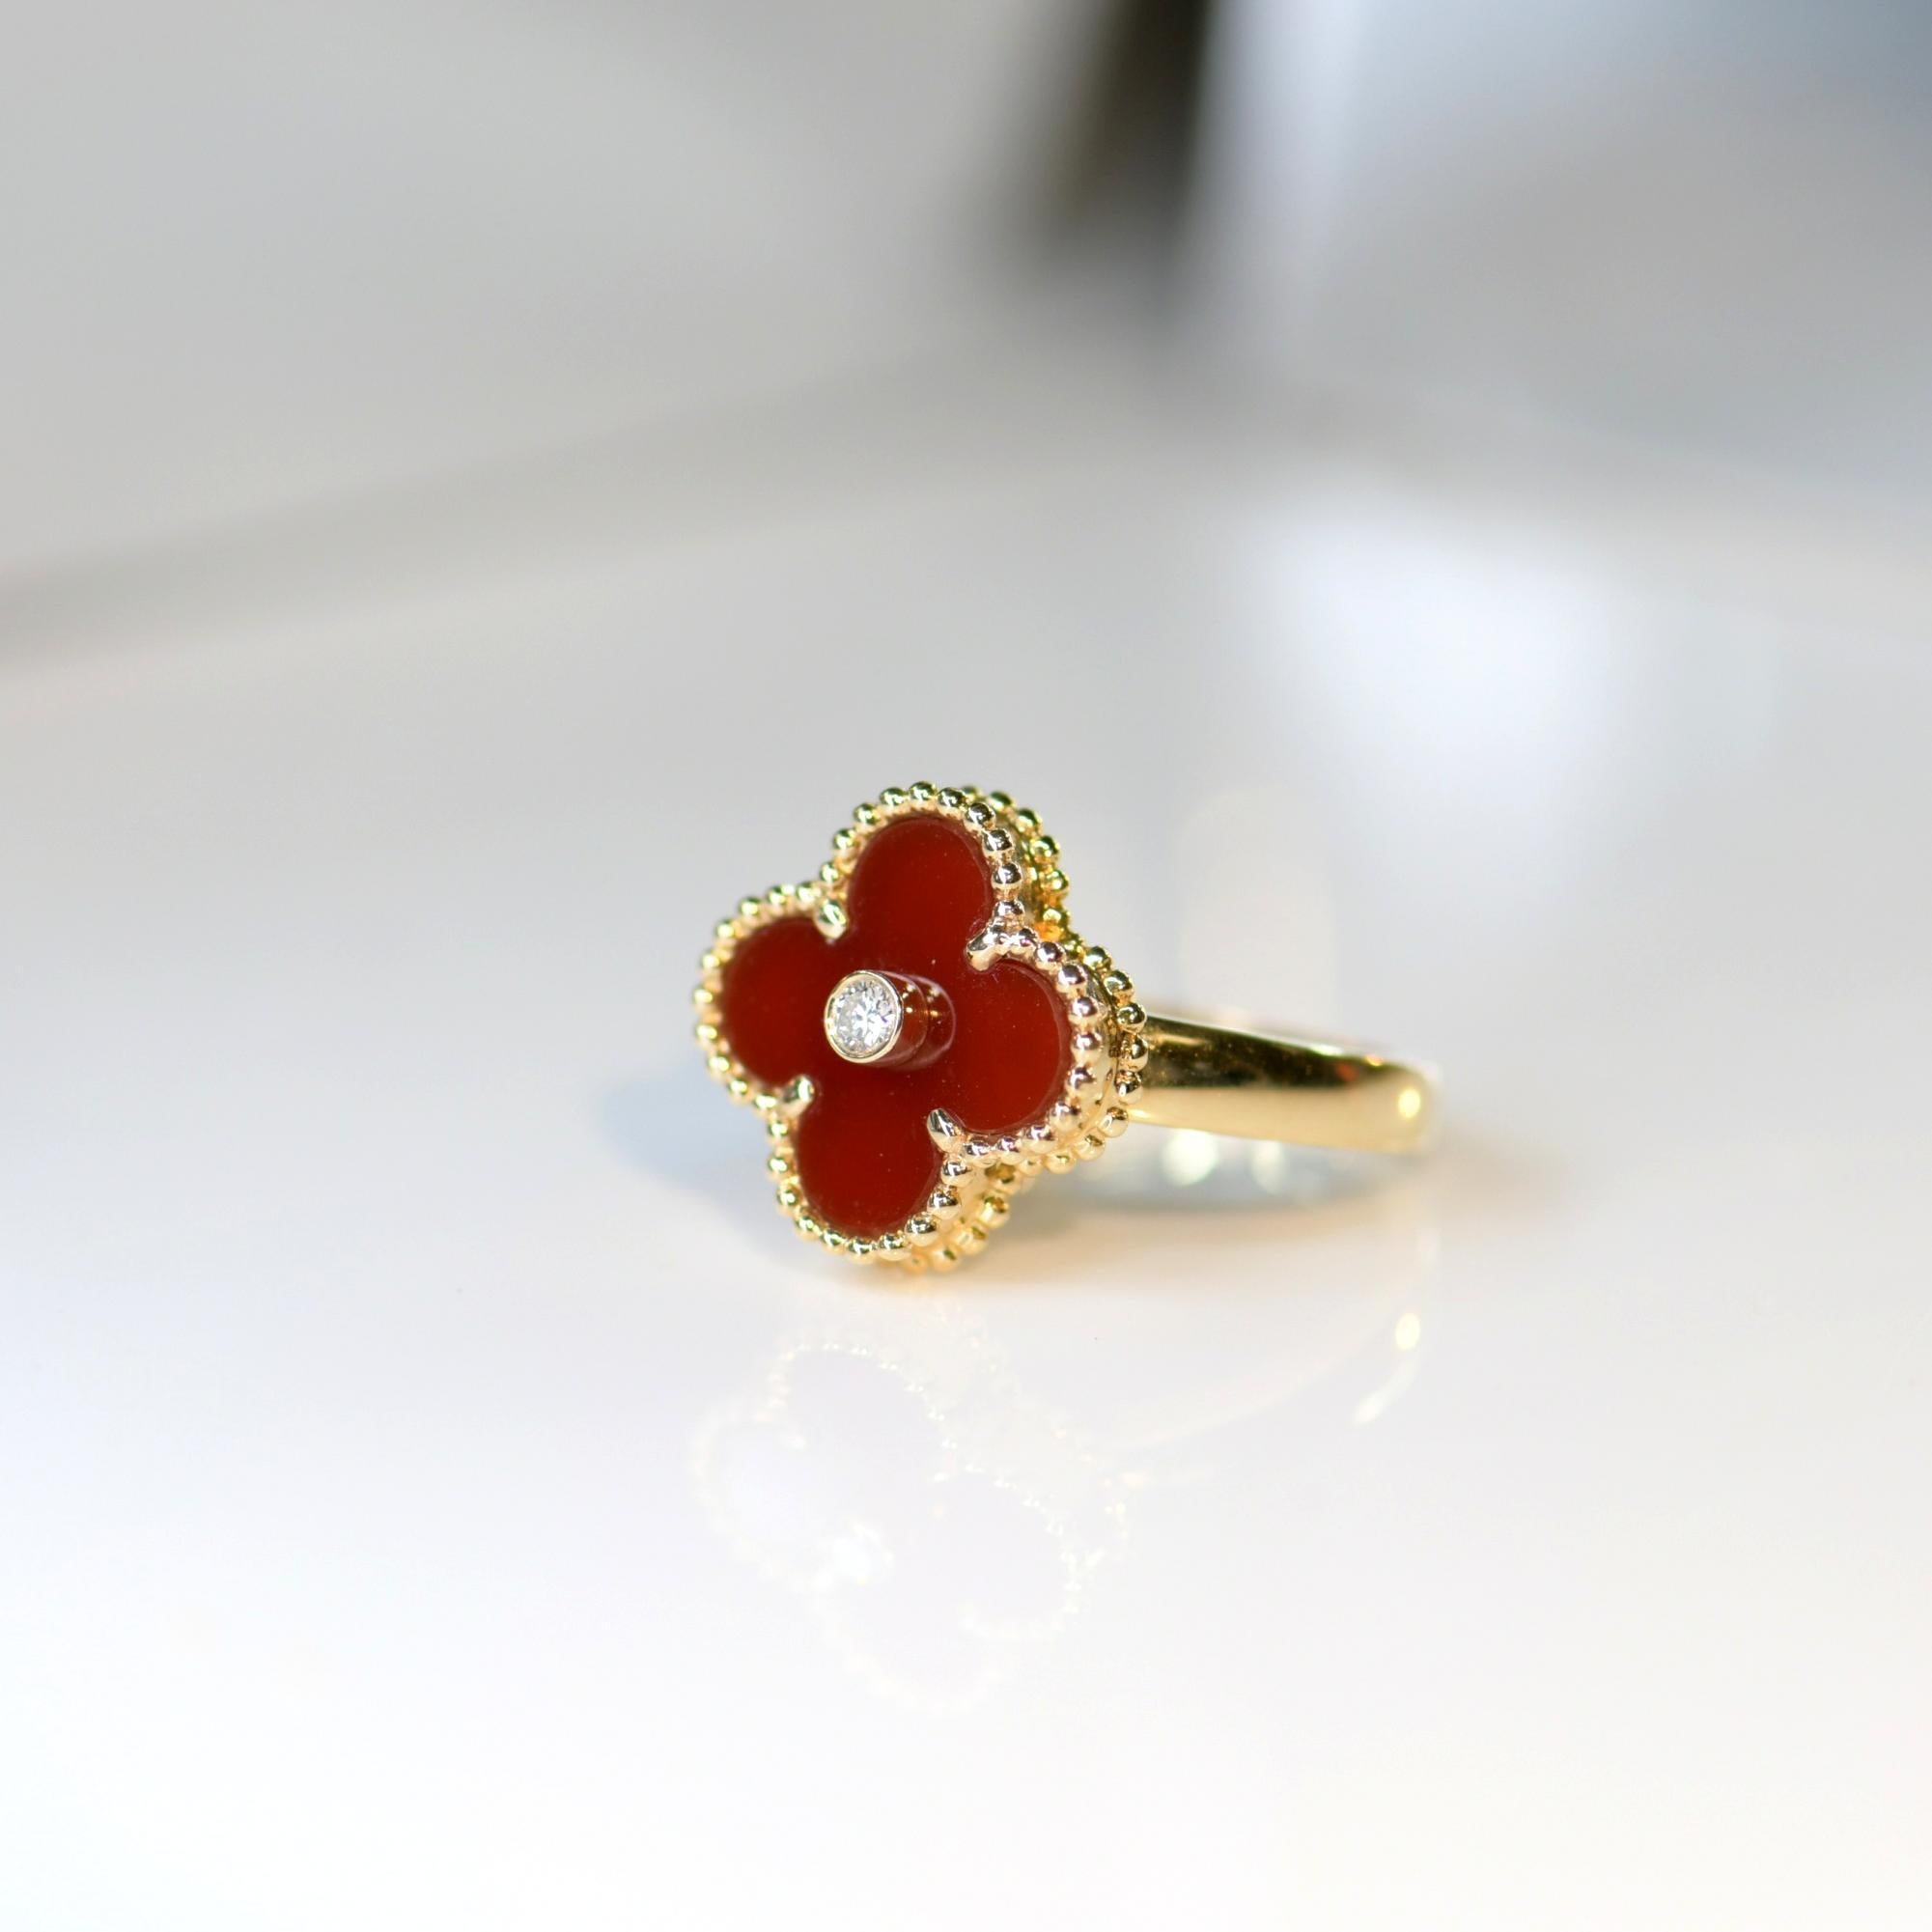 The iconic Alhambra Van Cleef & Arpels Alhambra carnelian diamond ring. The iconic clover leaf design is comprised of  a warm red carnelian, creating a soft glow against your ring.

This is the kind of piece that will become a staple of your